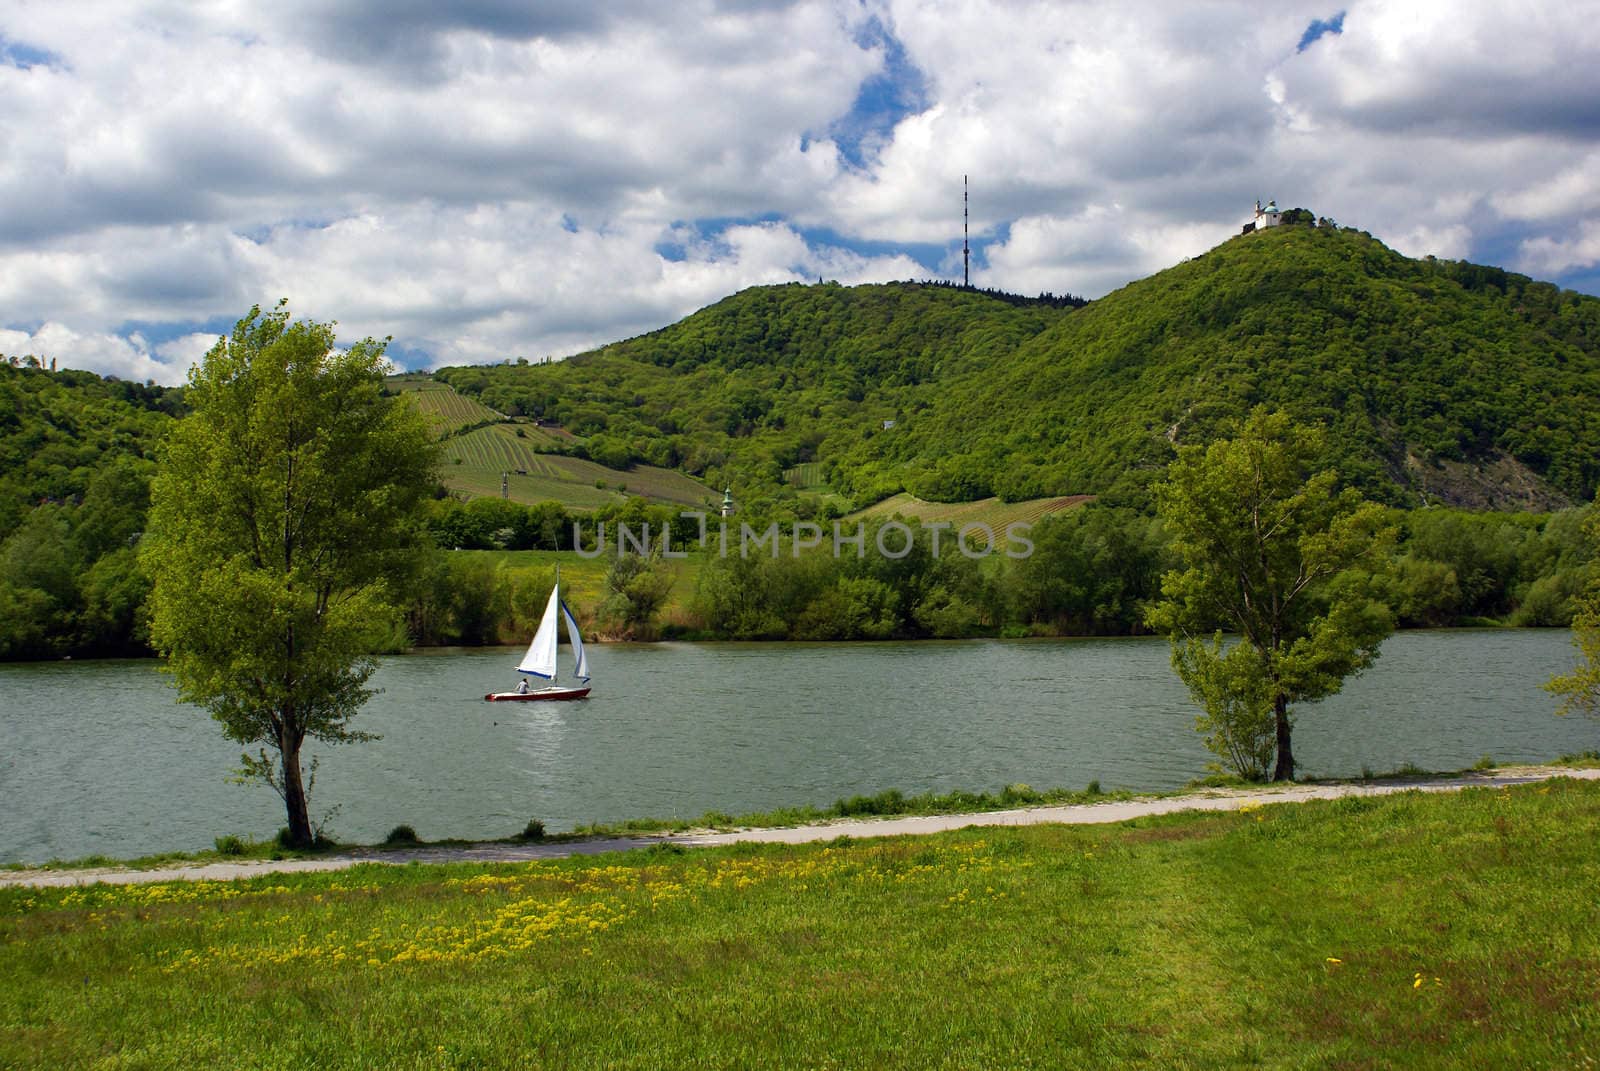 A little sail boat on a river green hills in the background cloudy sky.